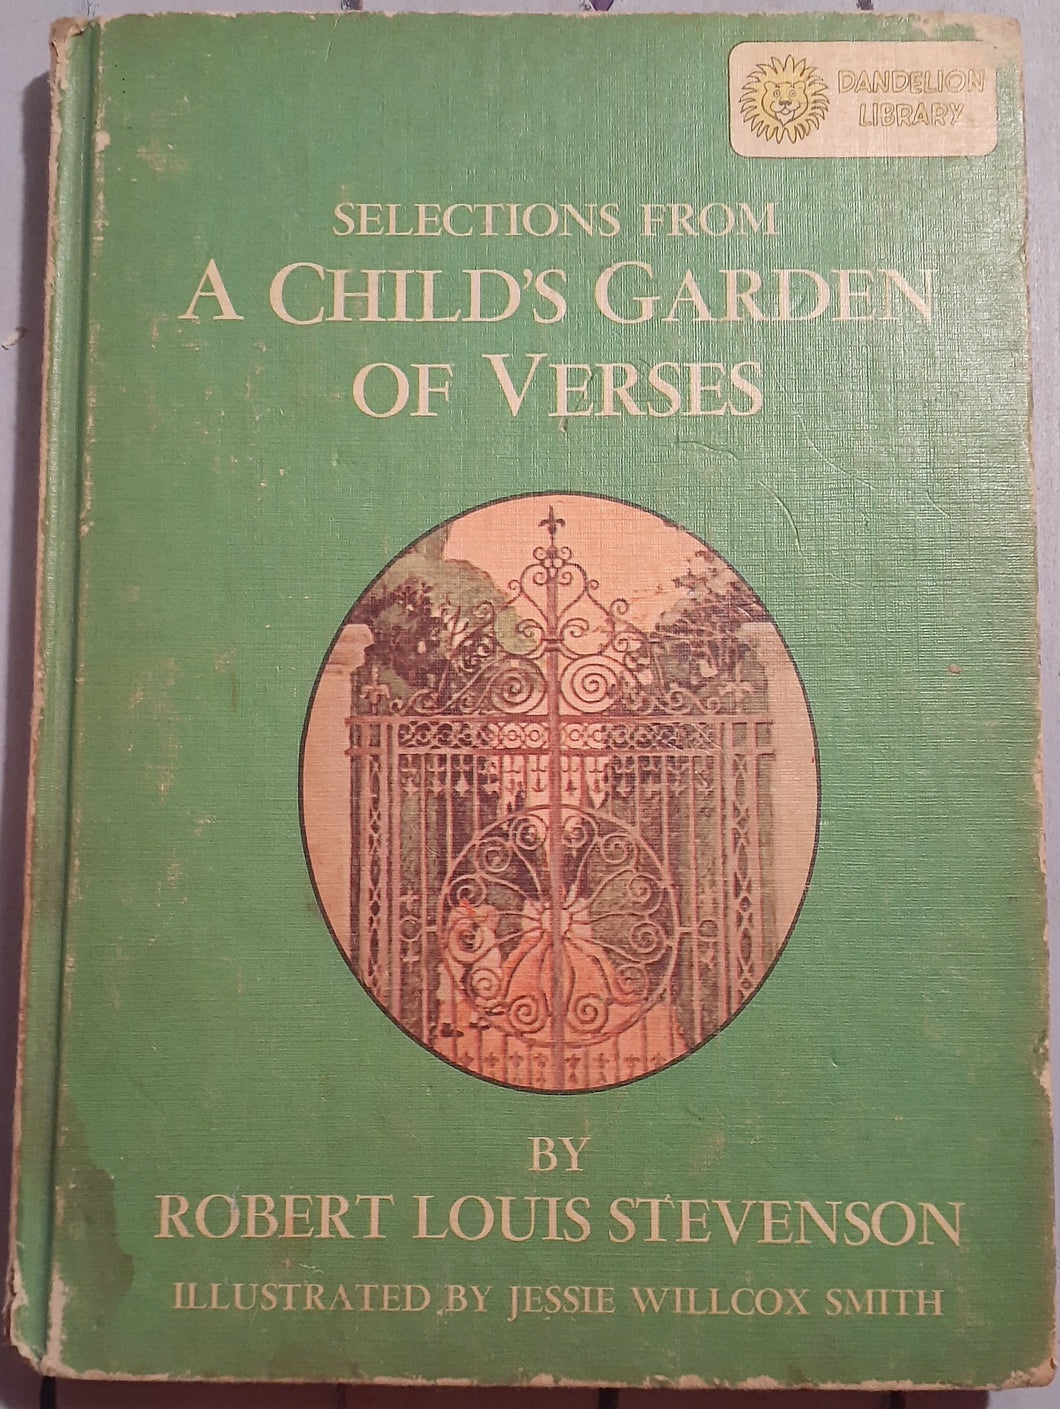 Selections from A Child's Garden of Verses